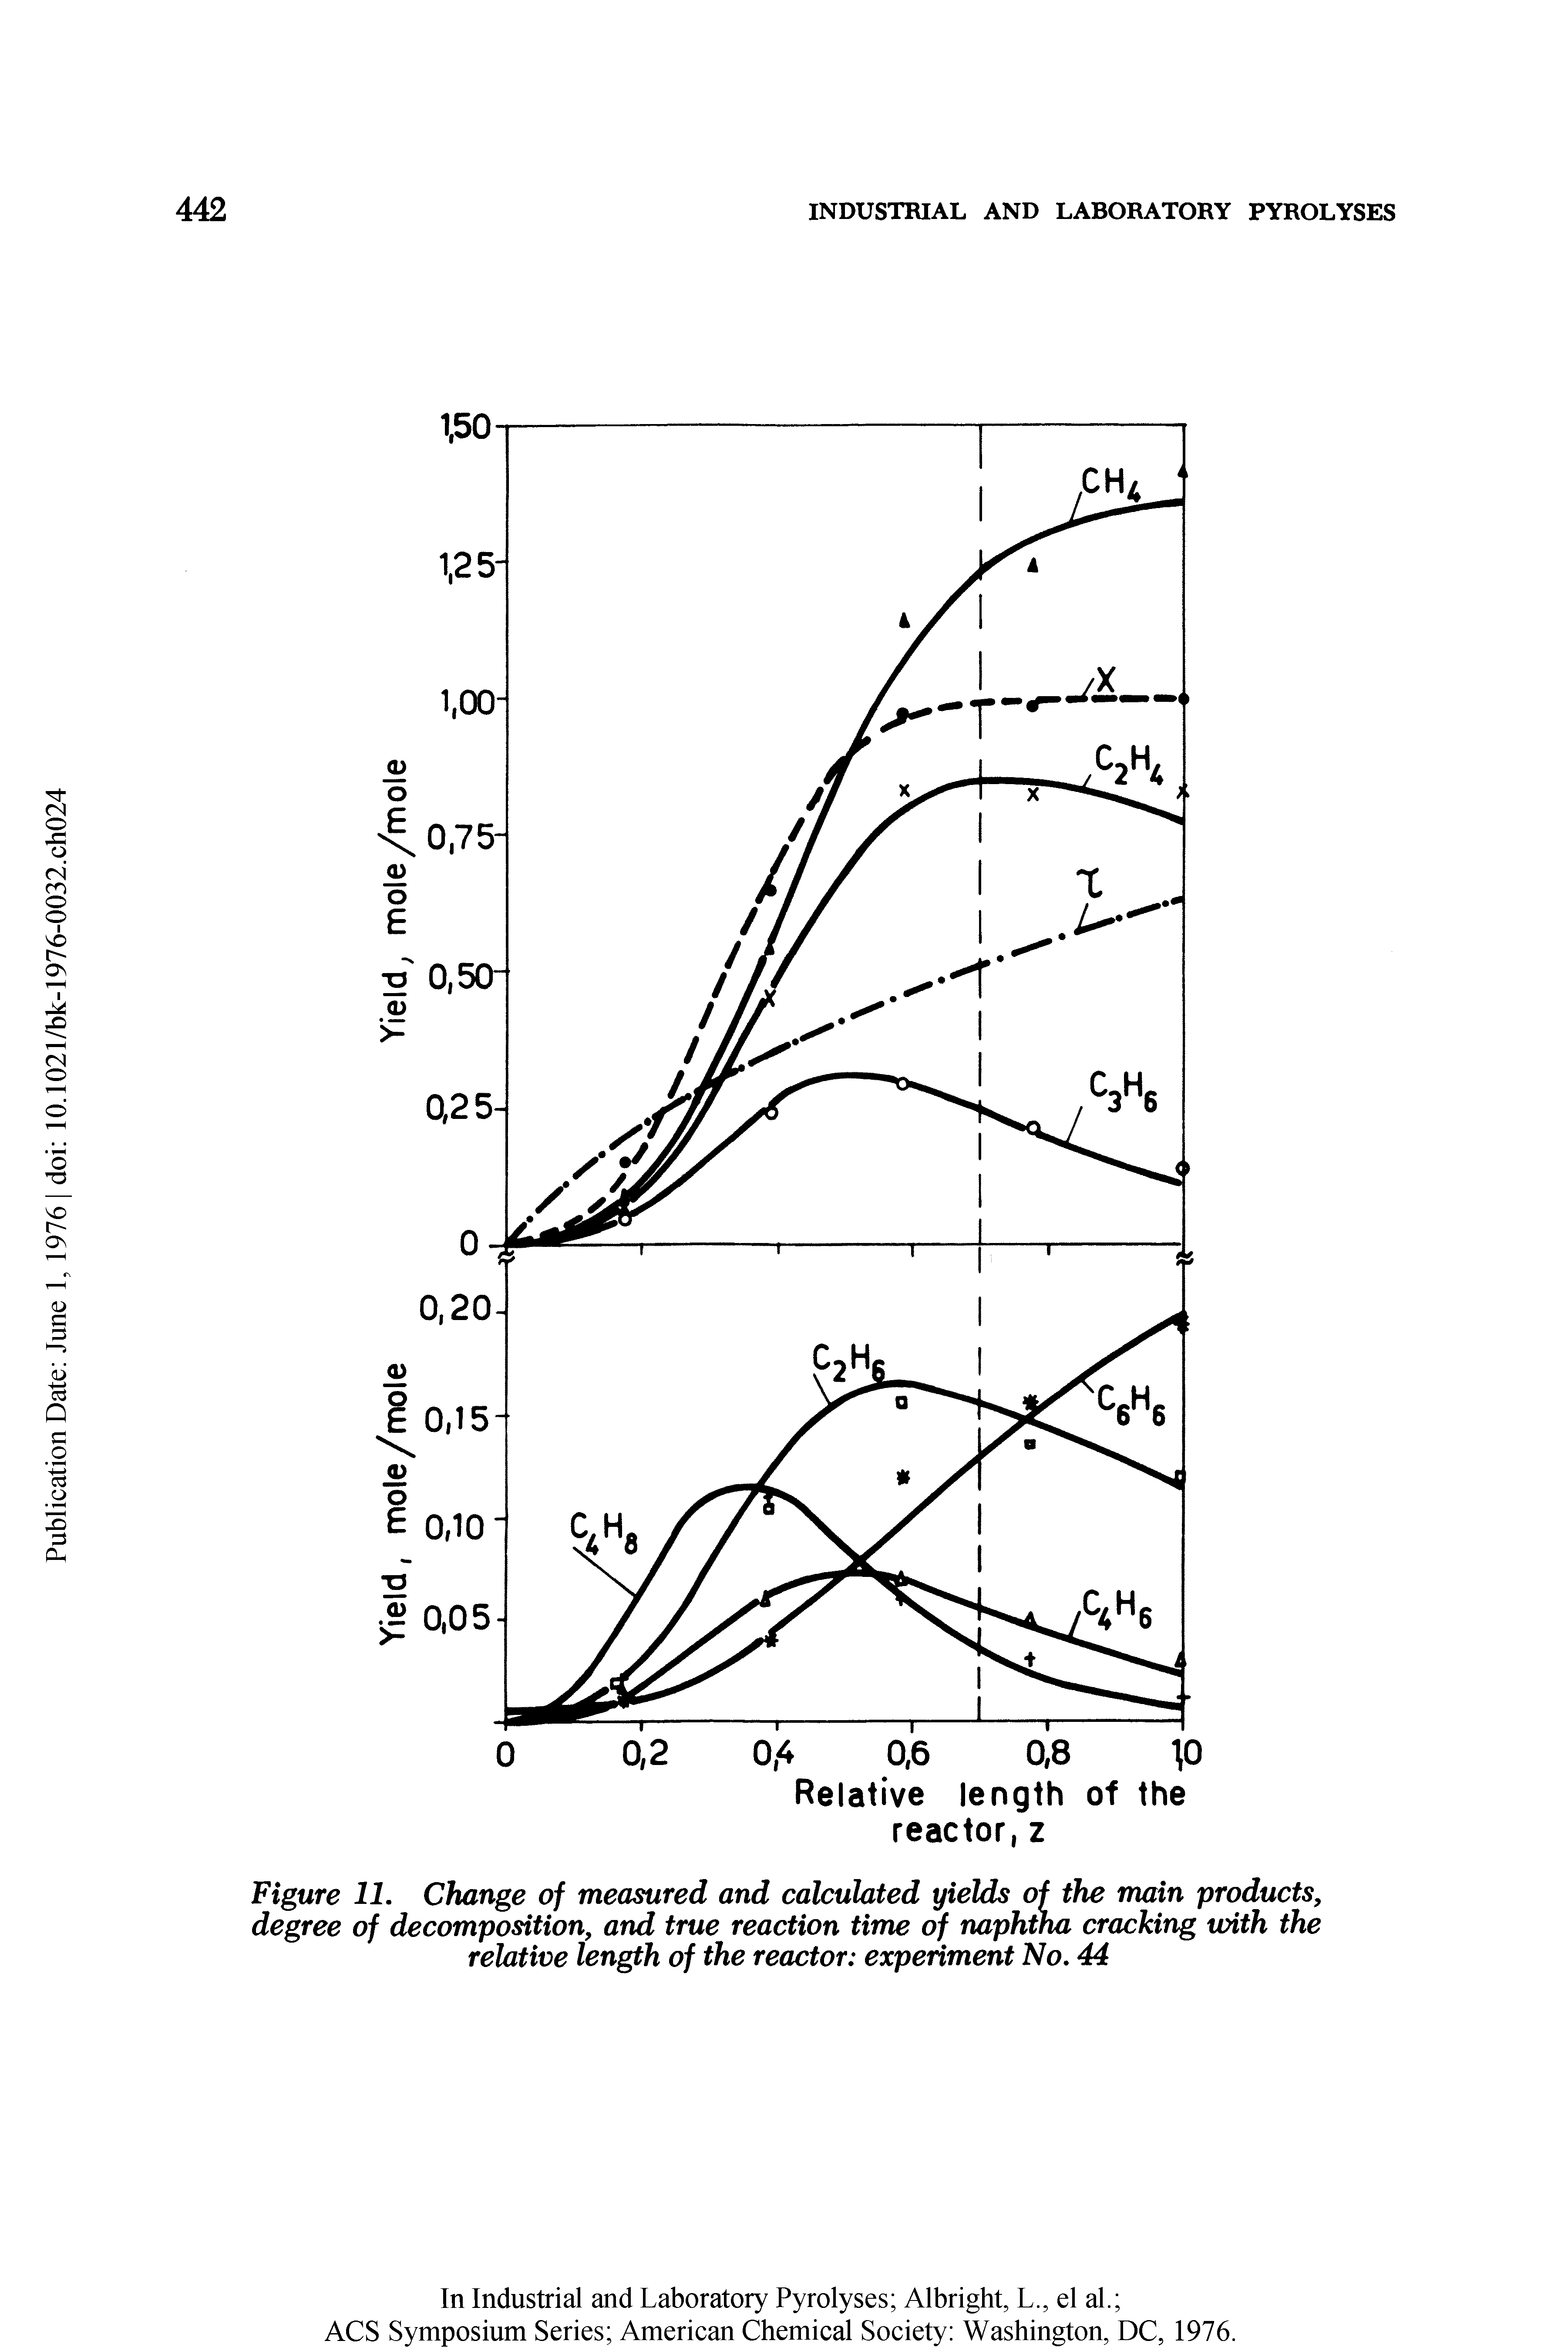 Figure 11. Change of measured and calculated yields of the main products, degree of decomposition, and true reaction time of naphtha cracking with the relative length of the reactor experiment No. 44...